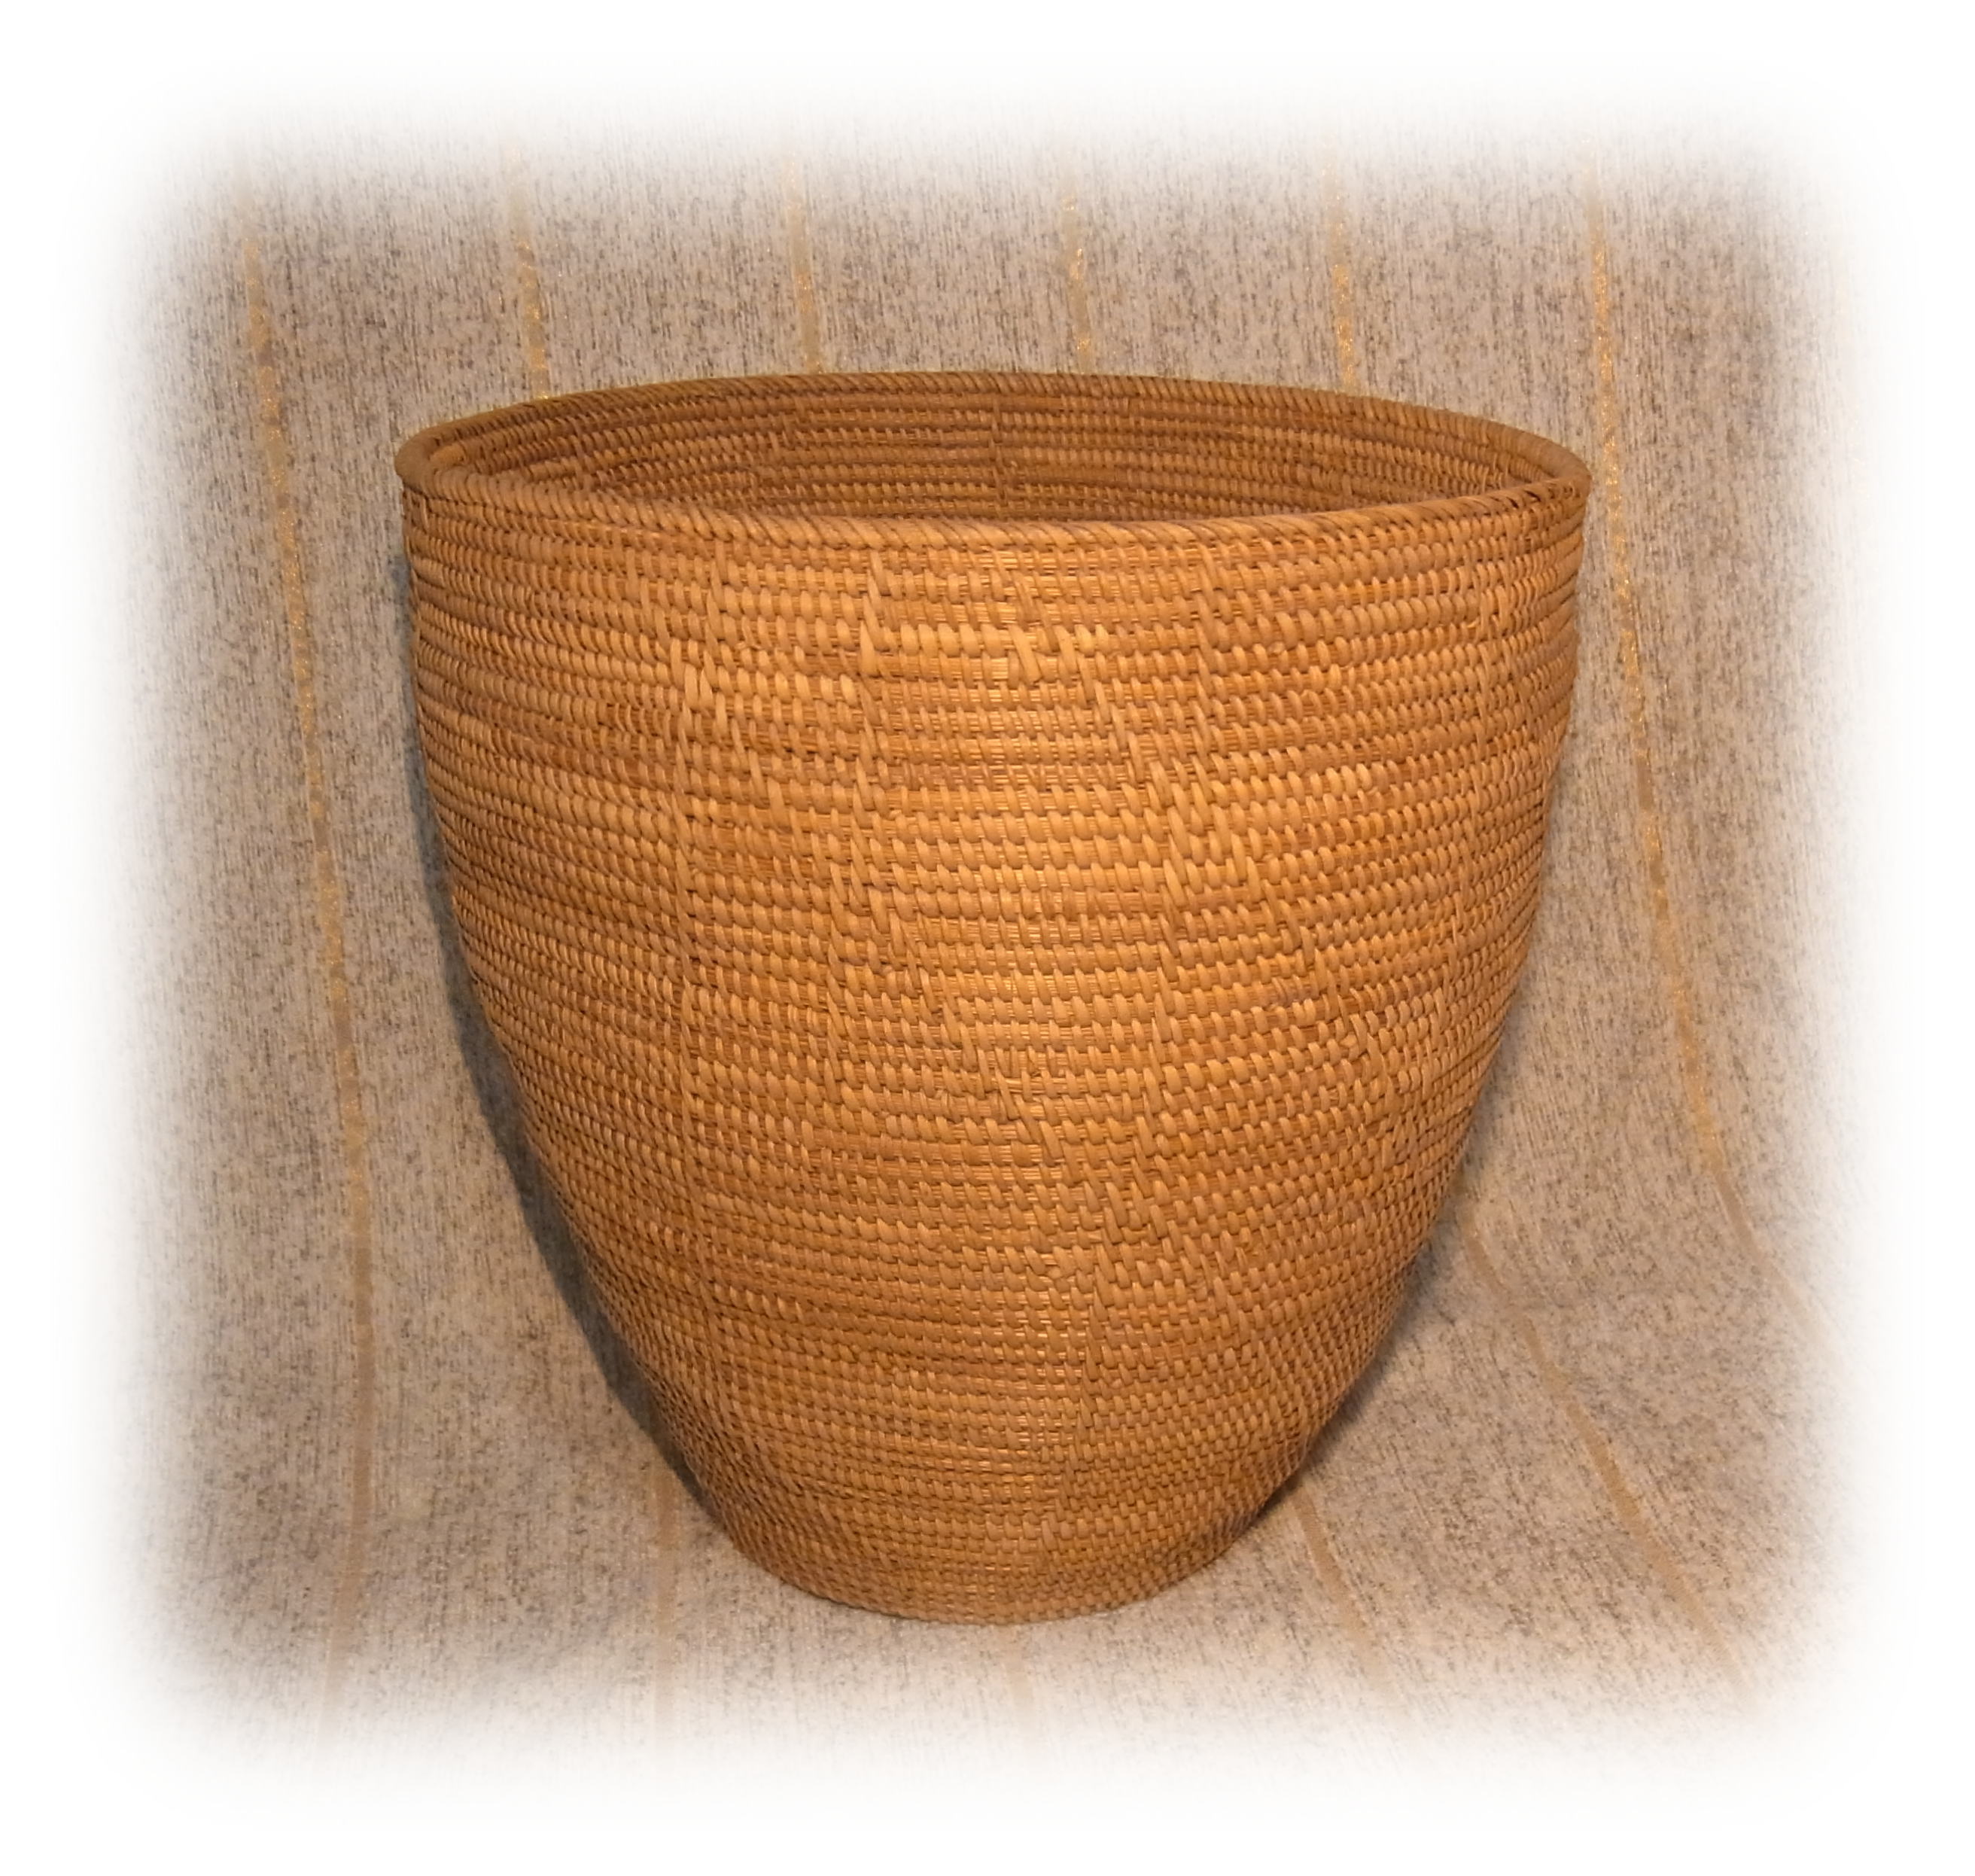 Old woven African basket